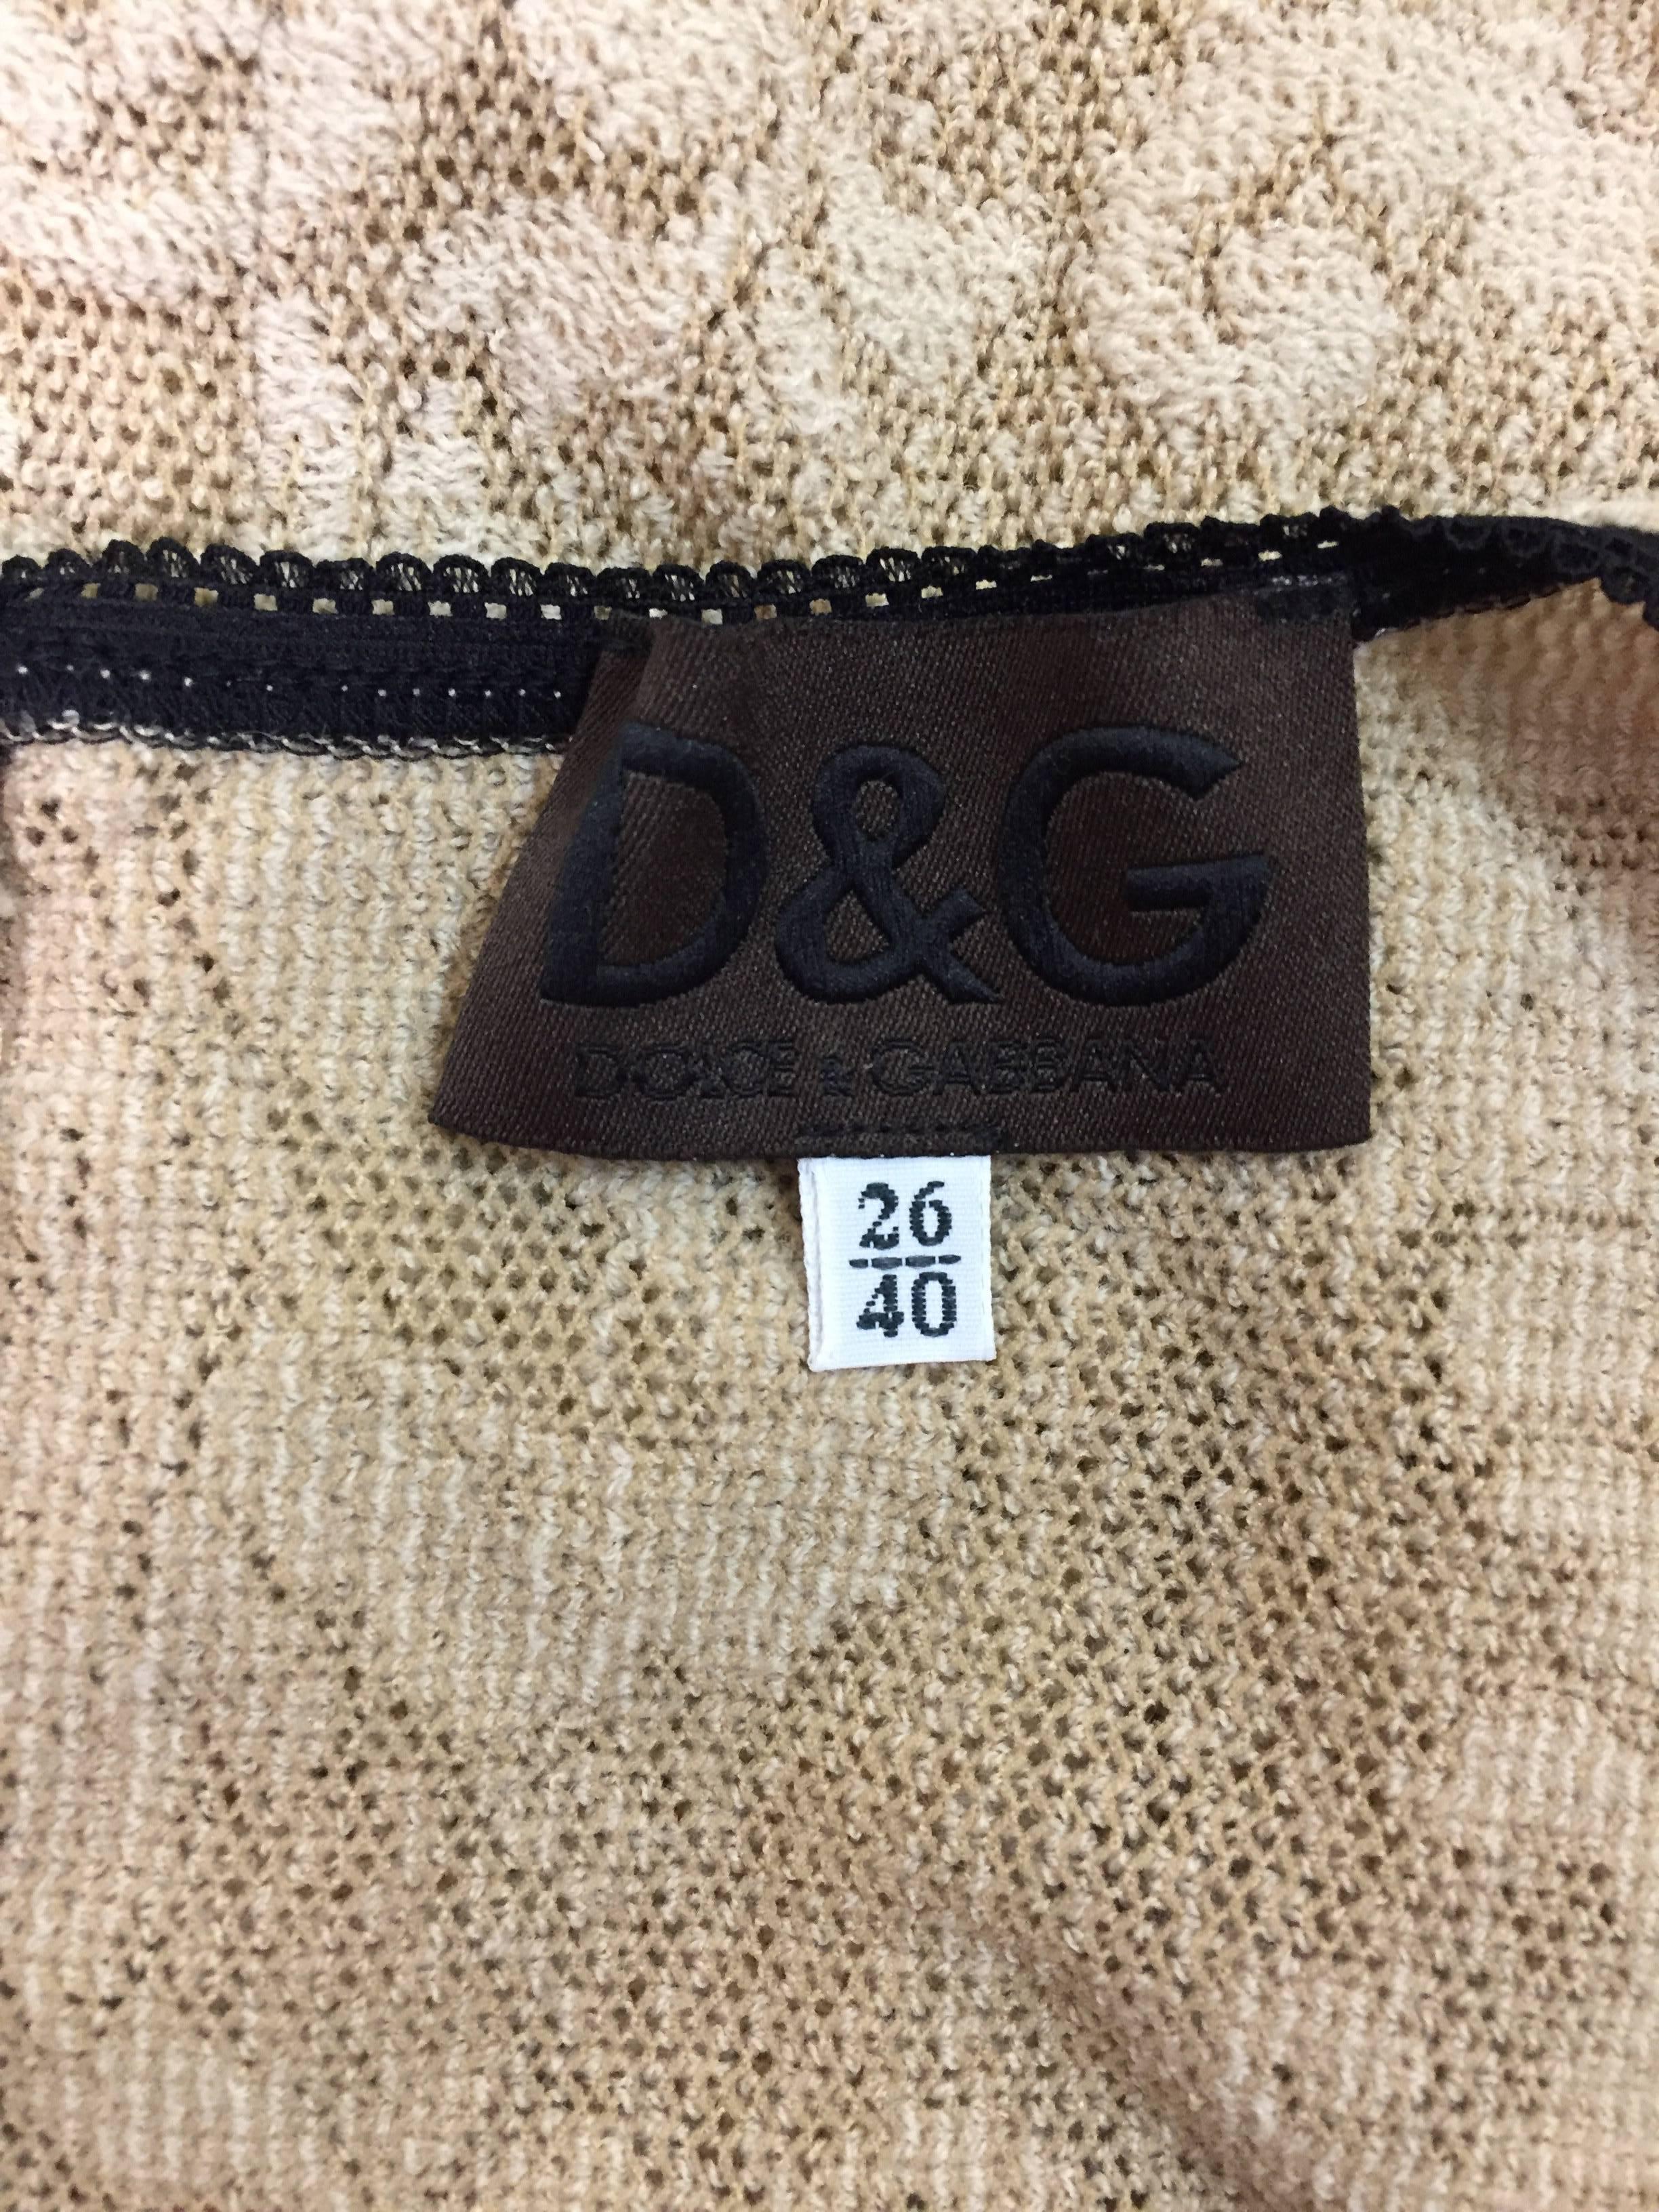 1998 D&G by Dolce & Gabbana Sheer Nude Fishnet Lace Mary Charm Long Dress In Good Condition In Yukon, OK